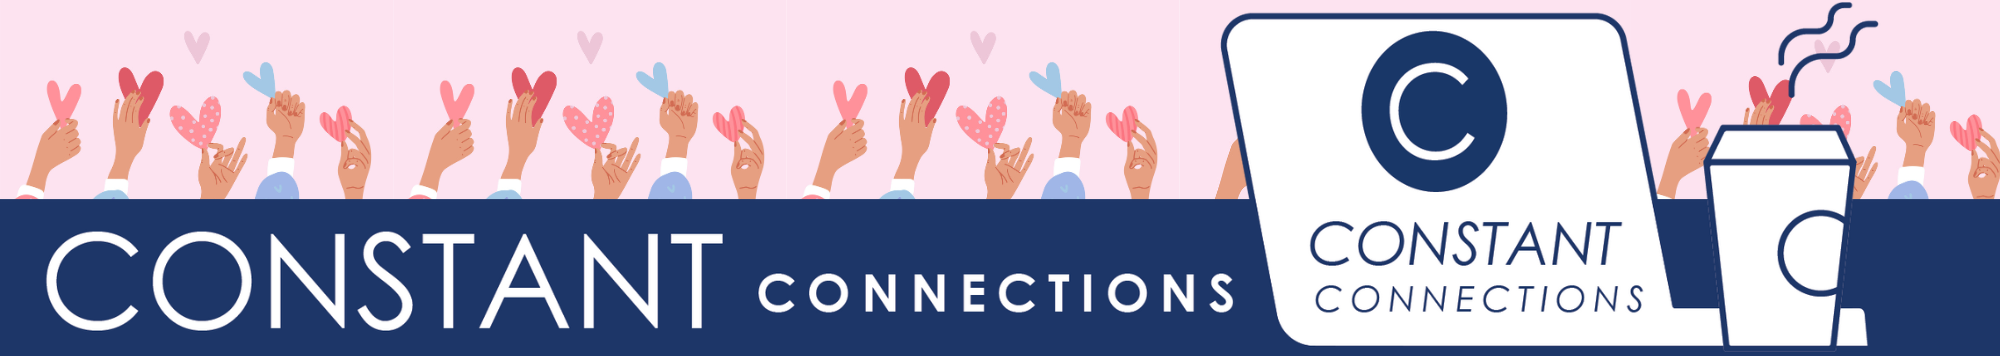 Header for newsletter says 'CONSTANT Connections' on a dark blue banner and a computer. Surrounded by background of hands holding hearts.